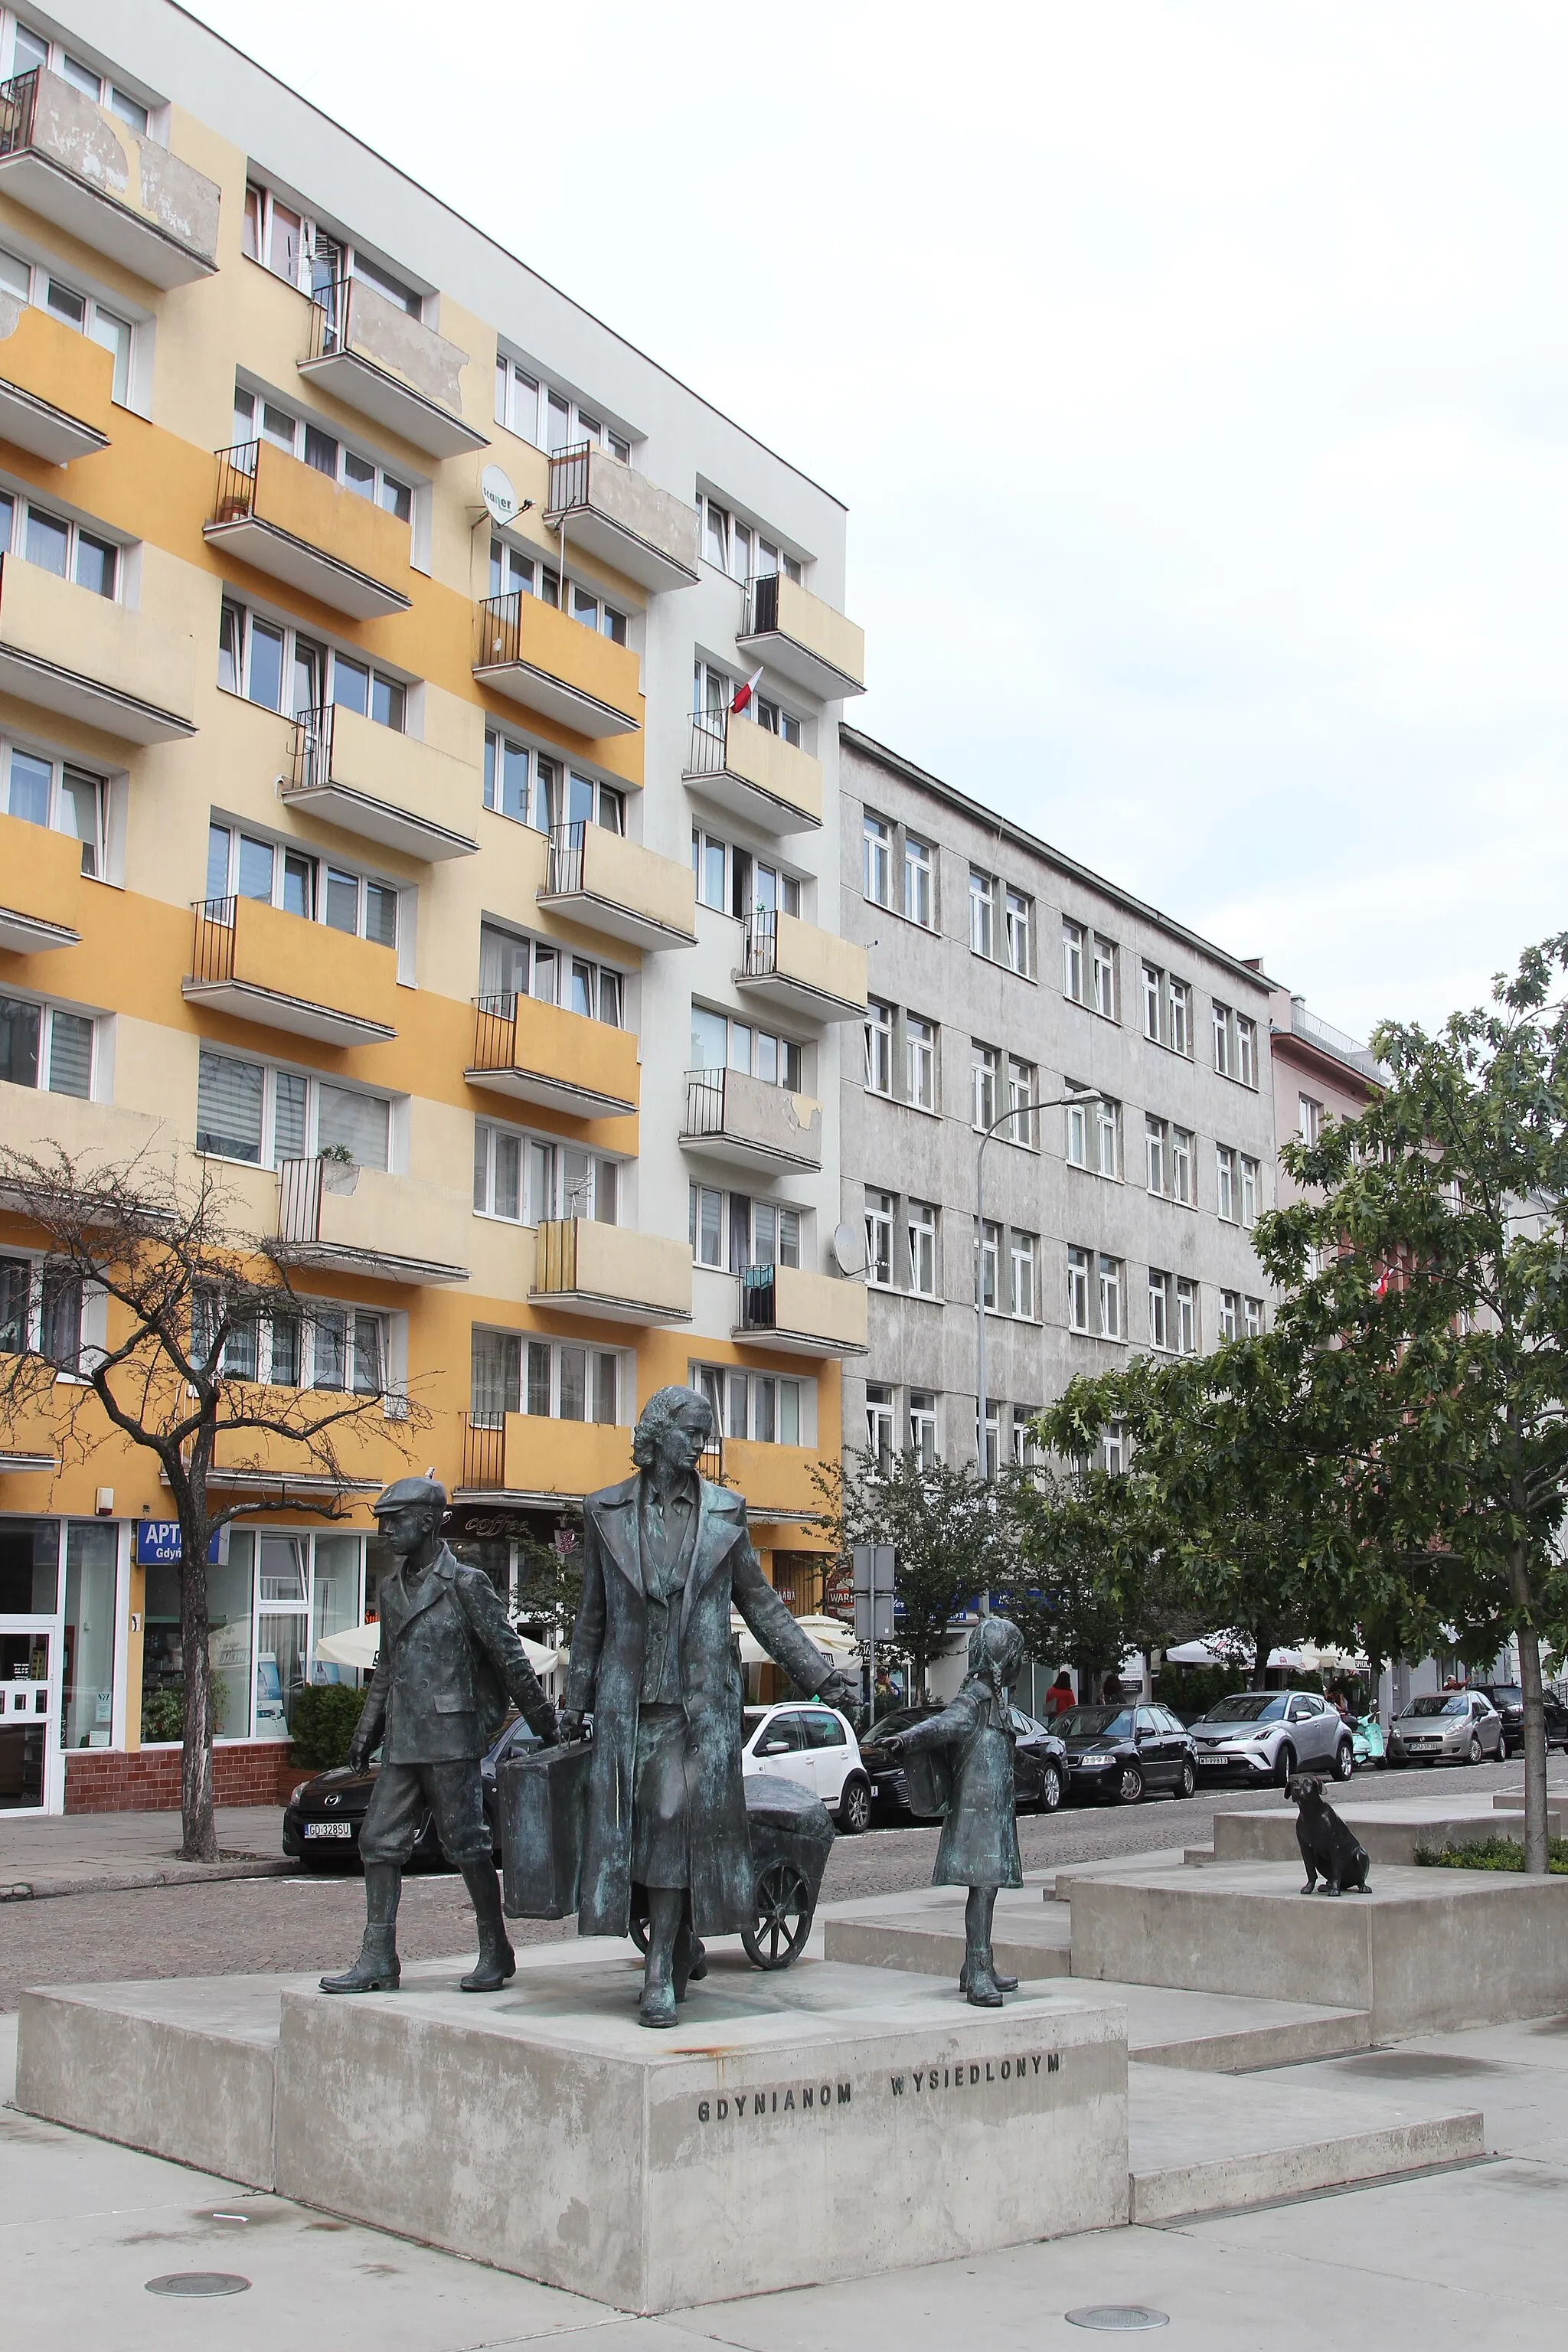 Photo showing: Monument to the Displaced Gdynia citizens